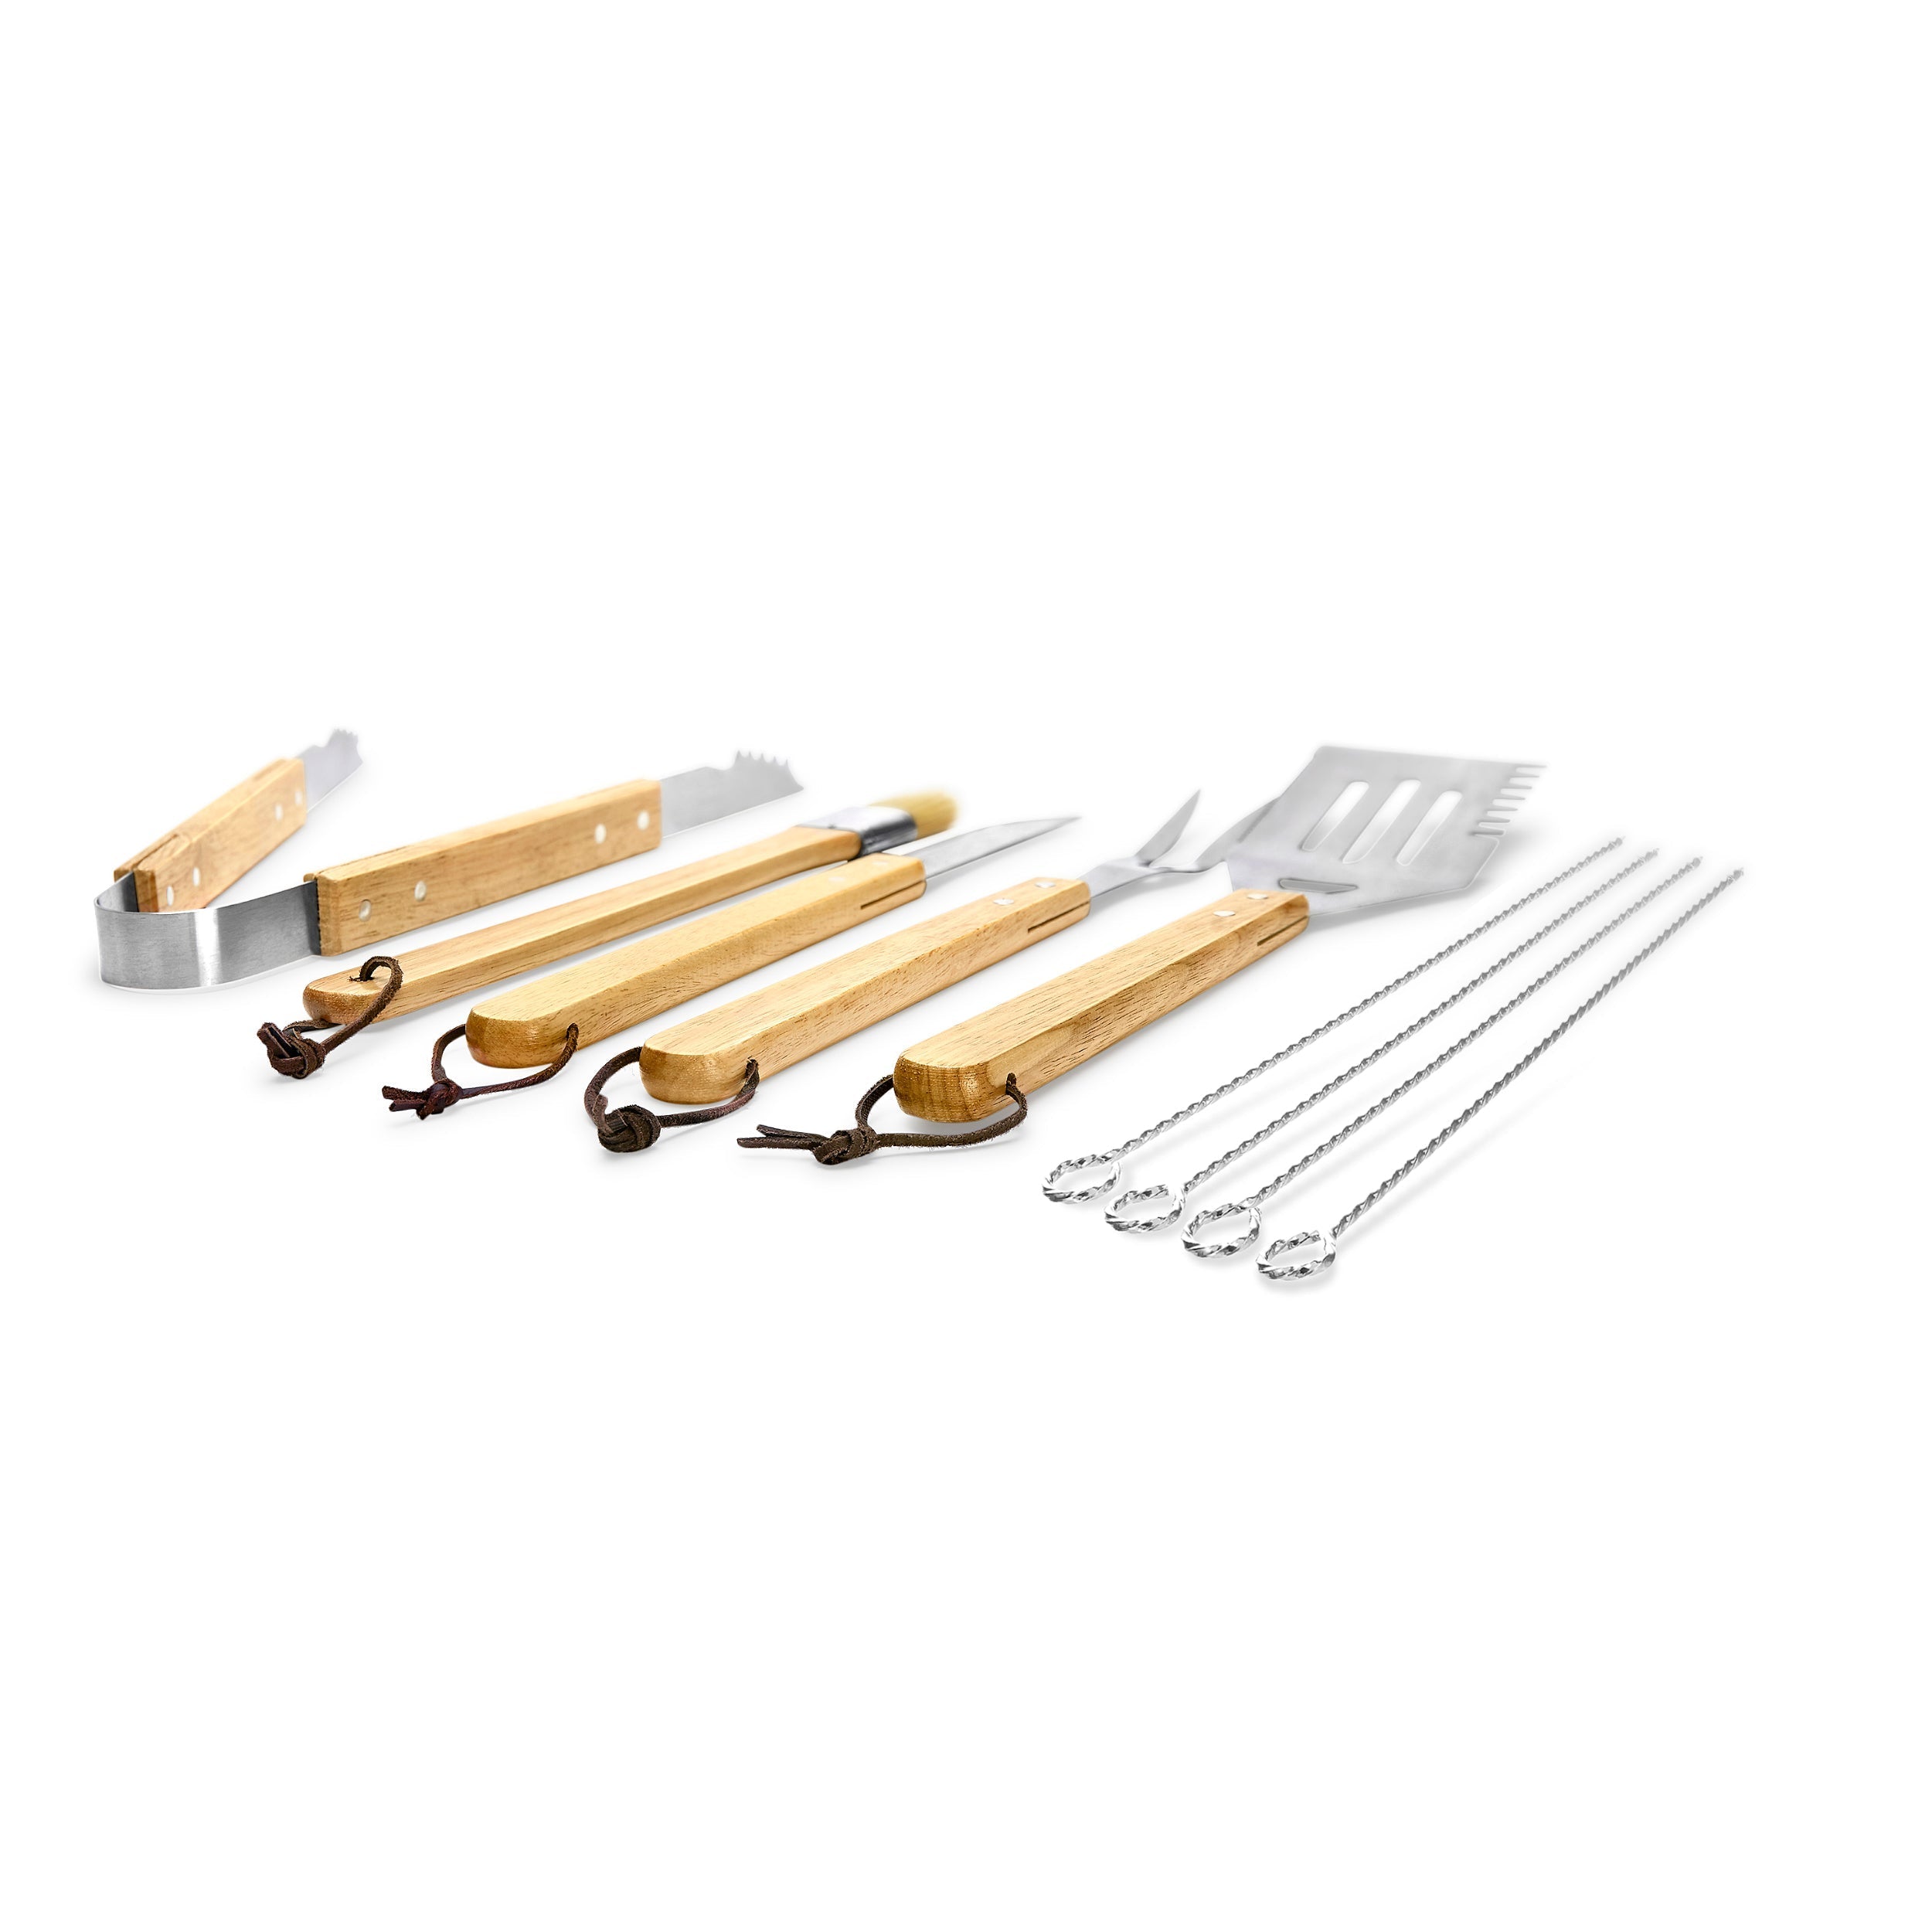 11 Piece BBQ Grill Set - Barbecue